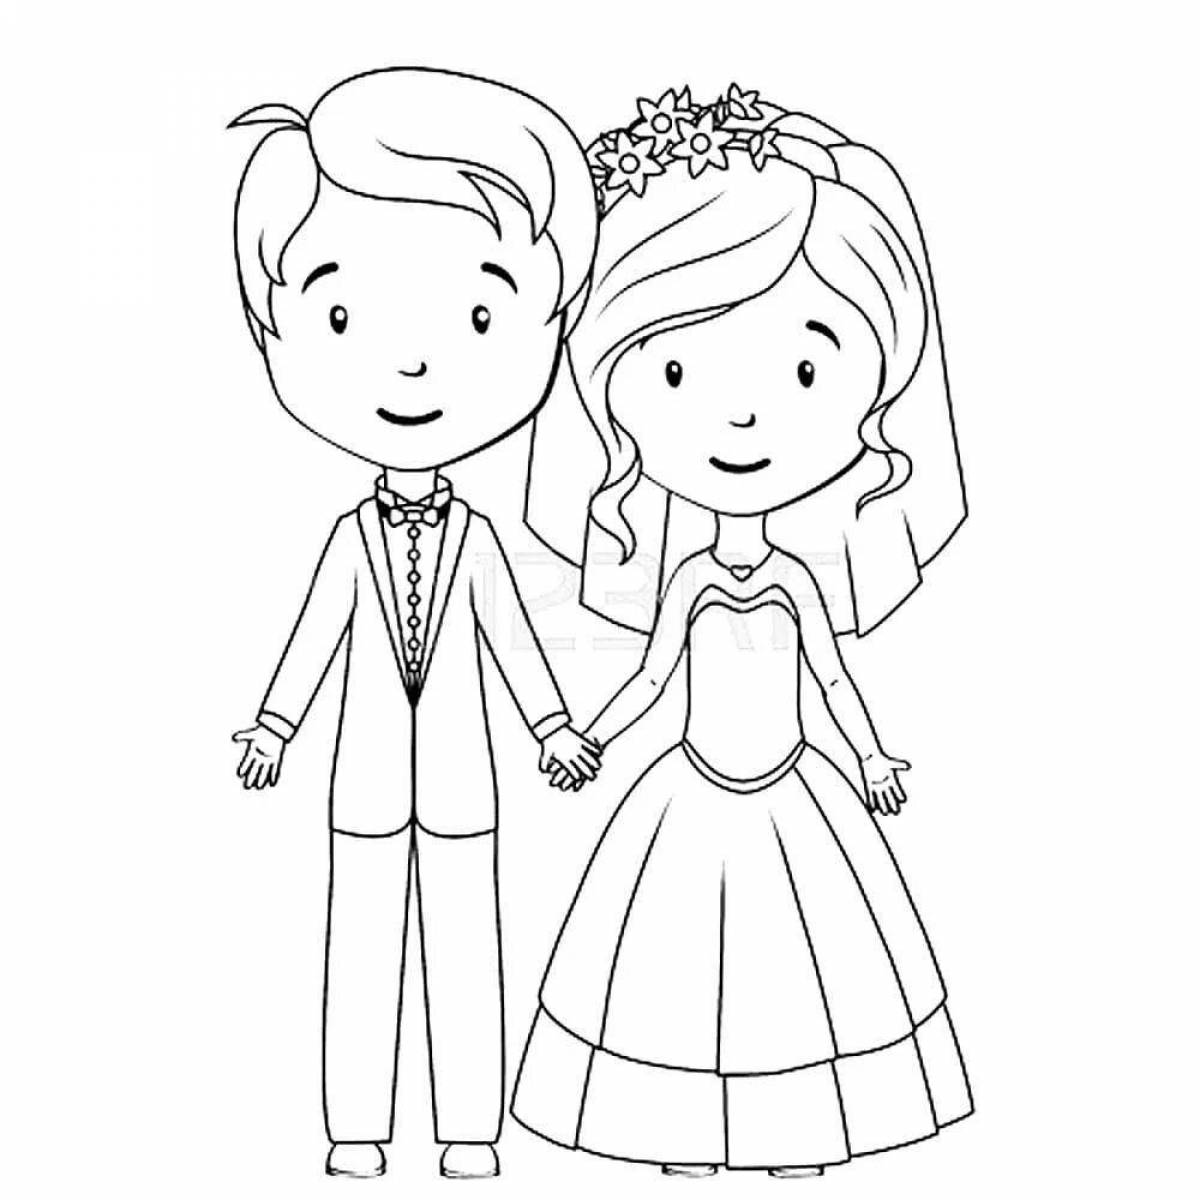 Dazzling bride and groom coloring page